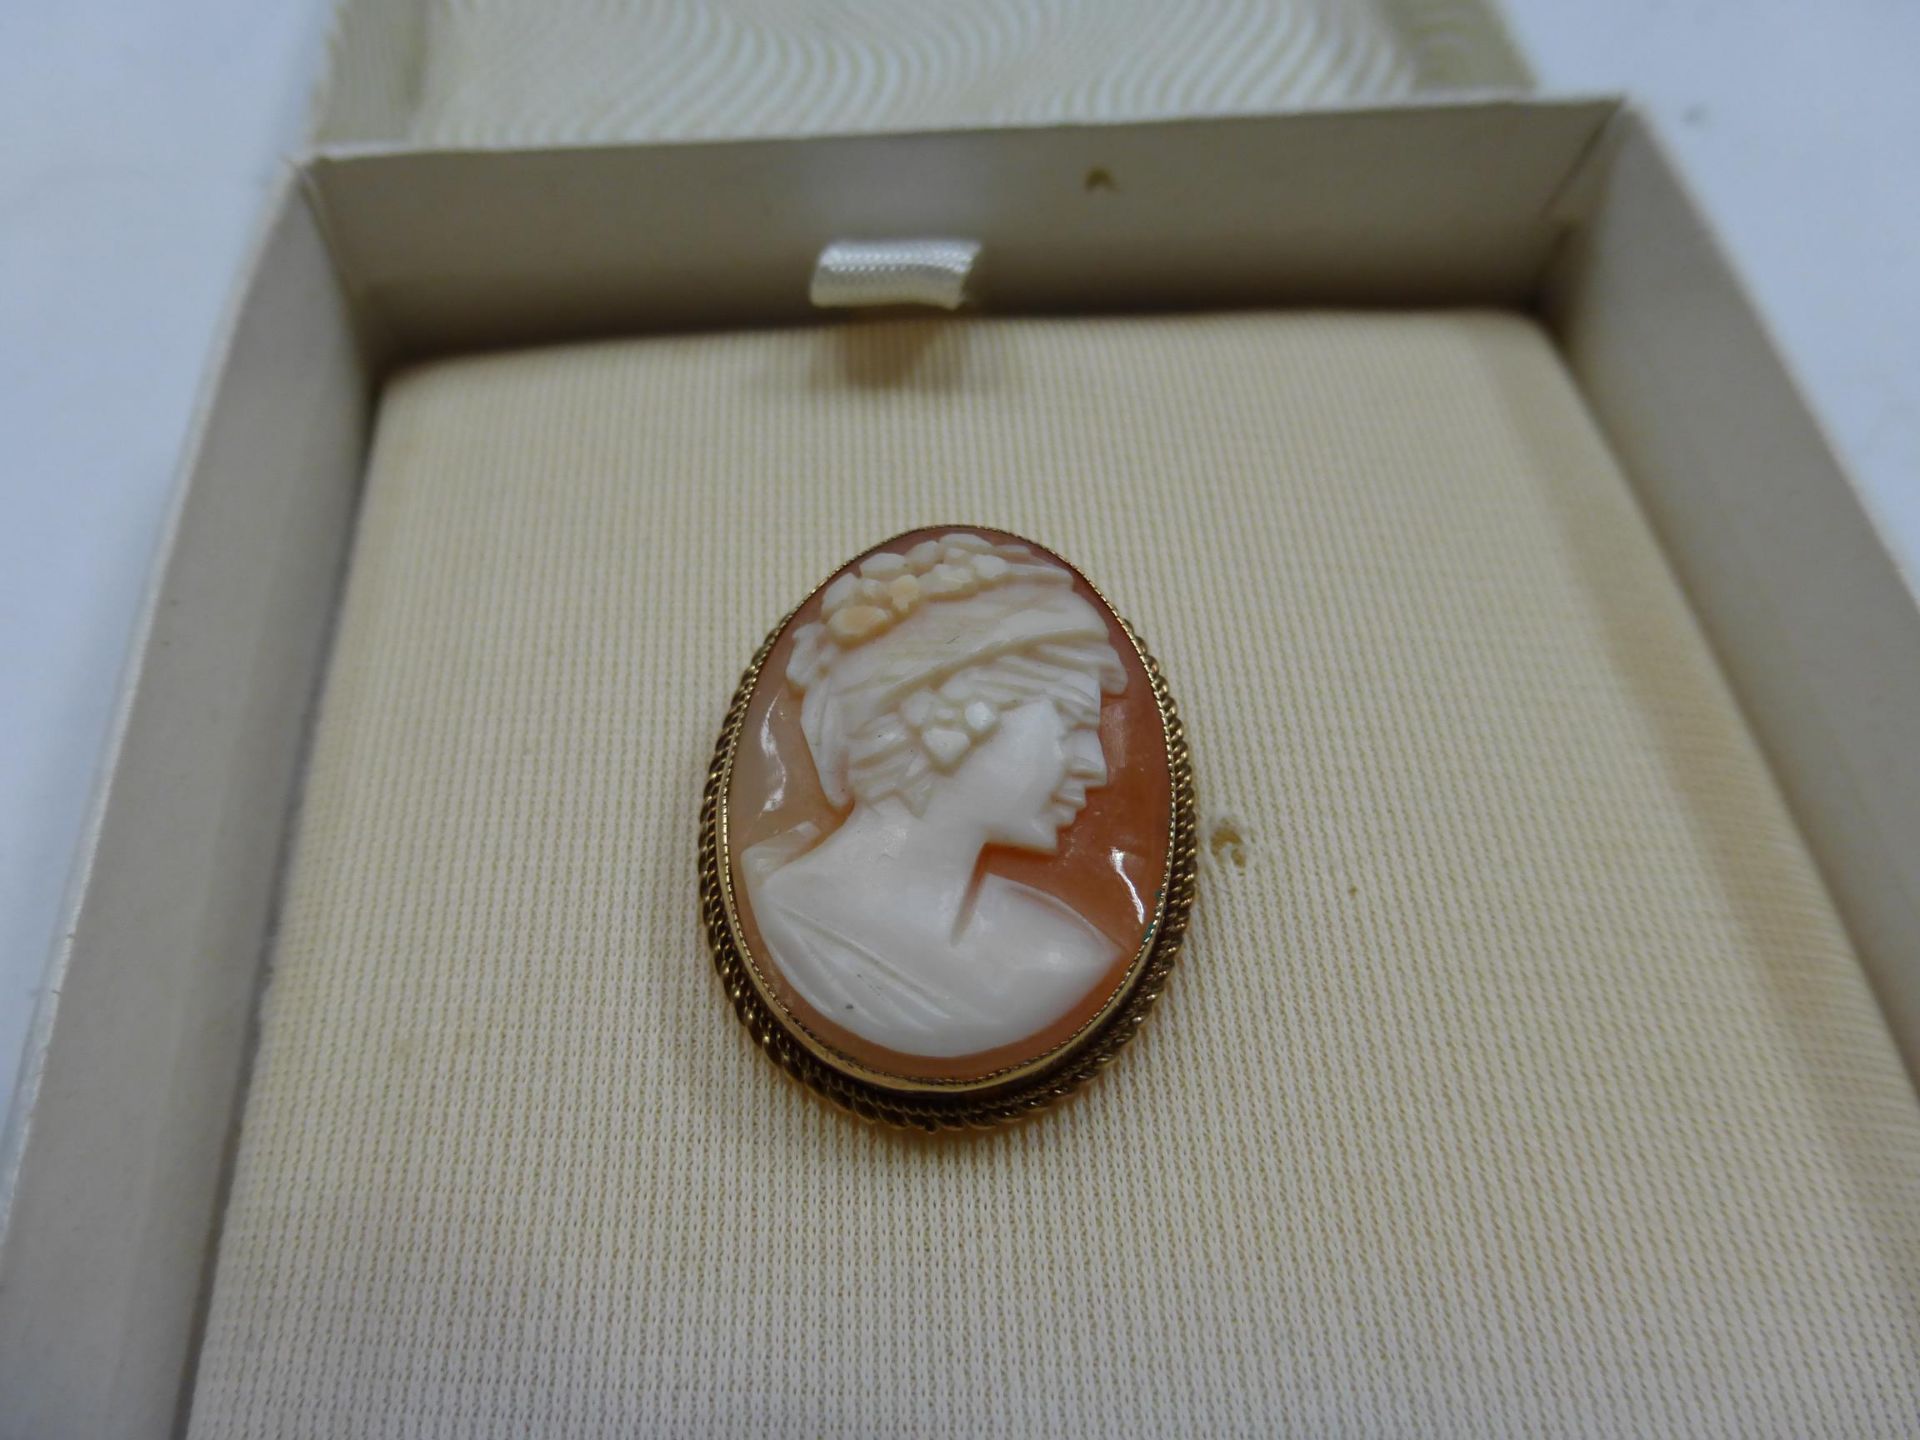 A 9ct Gold mounted carved Cameo Pendant Brooch, hallmarked (est. £25-£40)